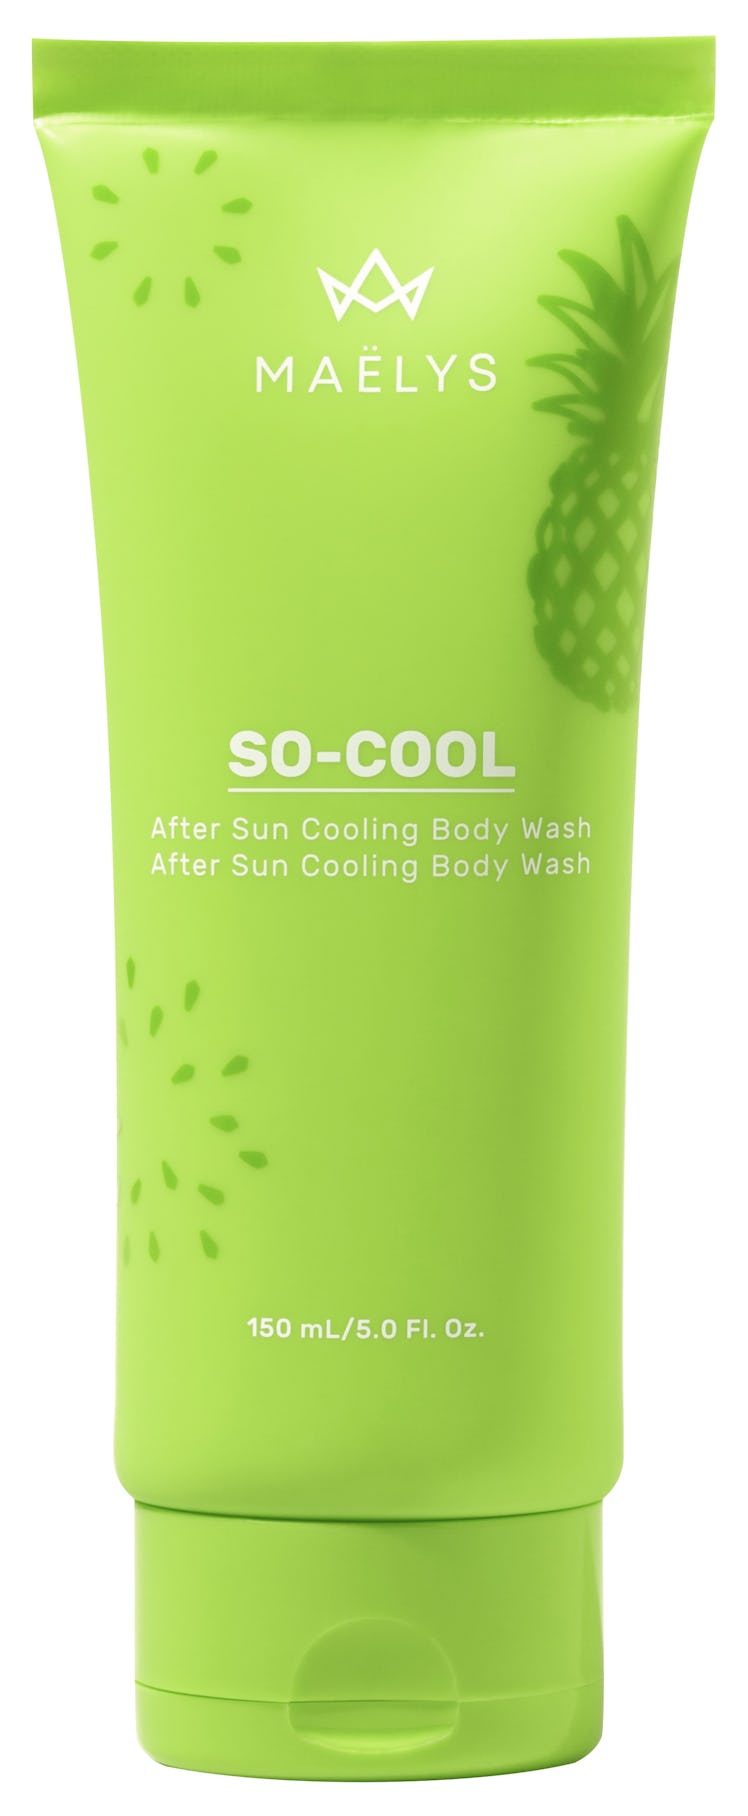 MAELYS' so-cool after sun cooling body wash is a june skin care must have